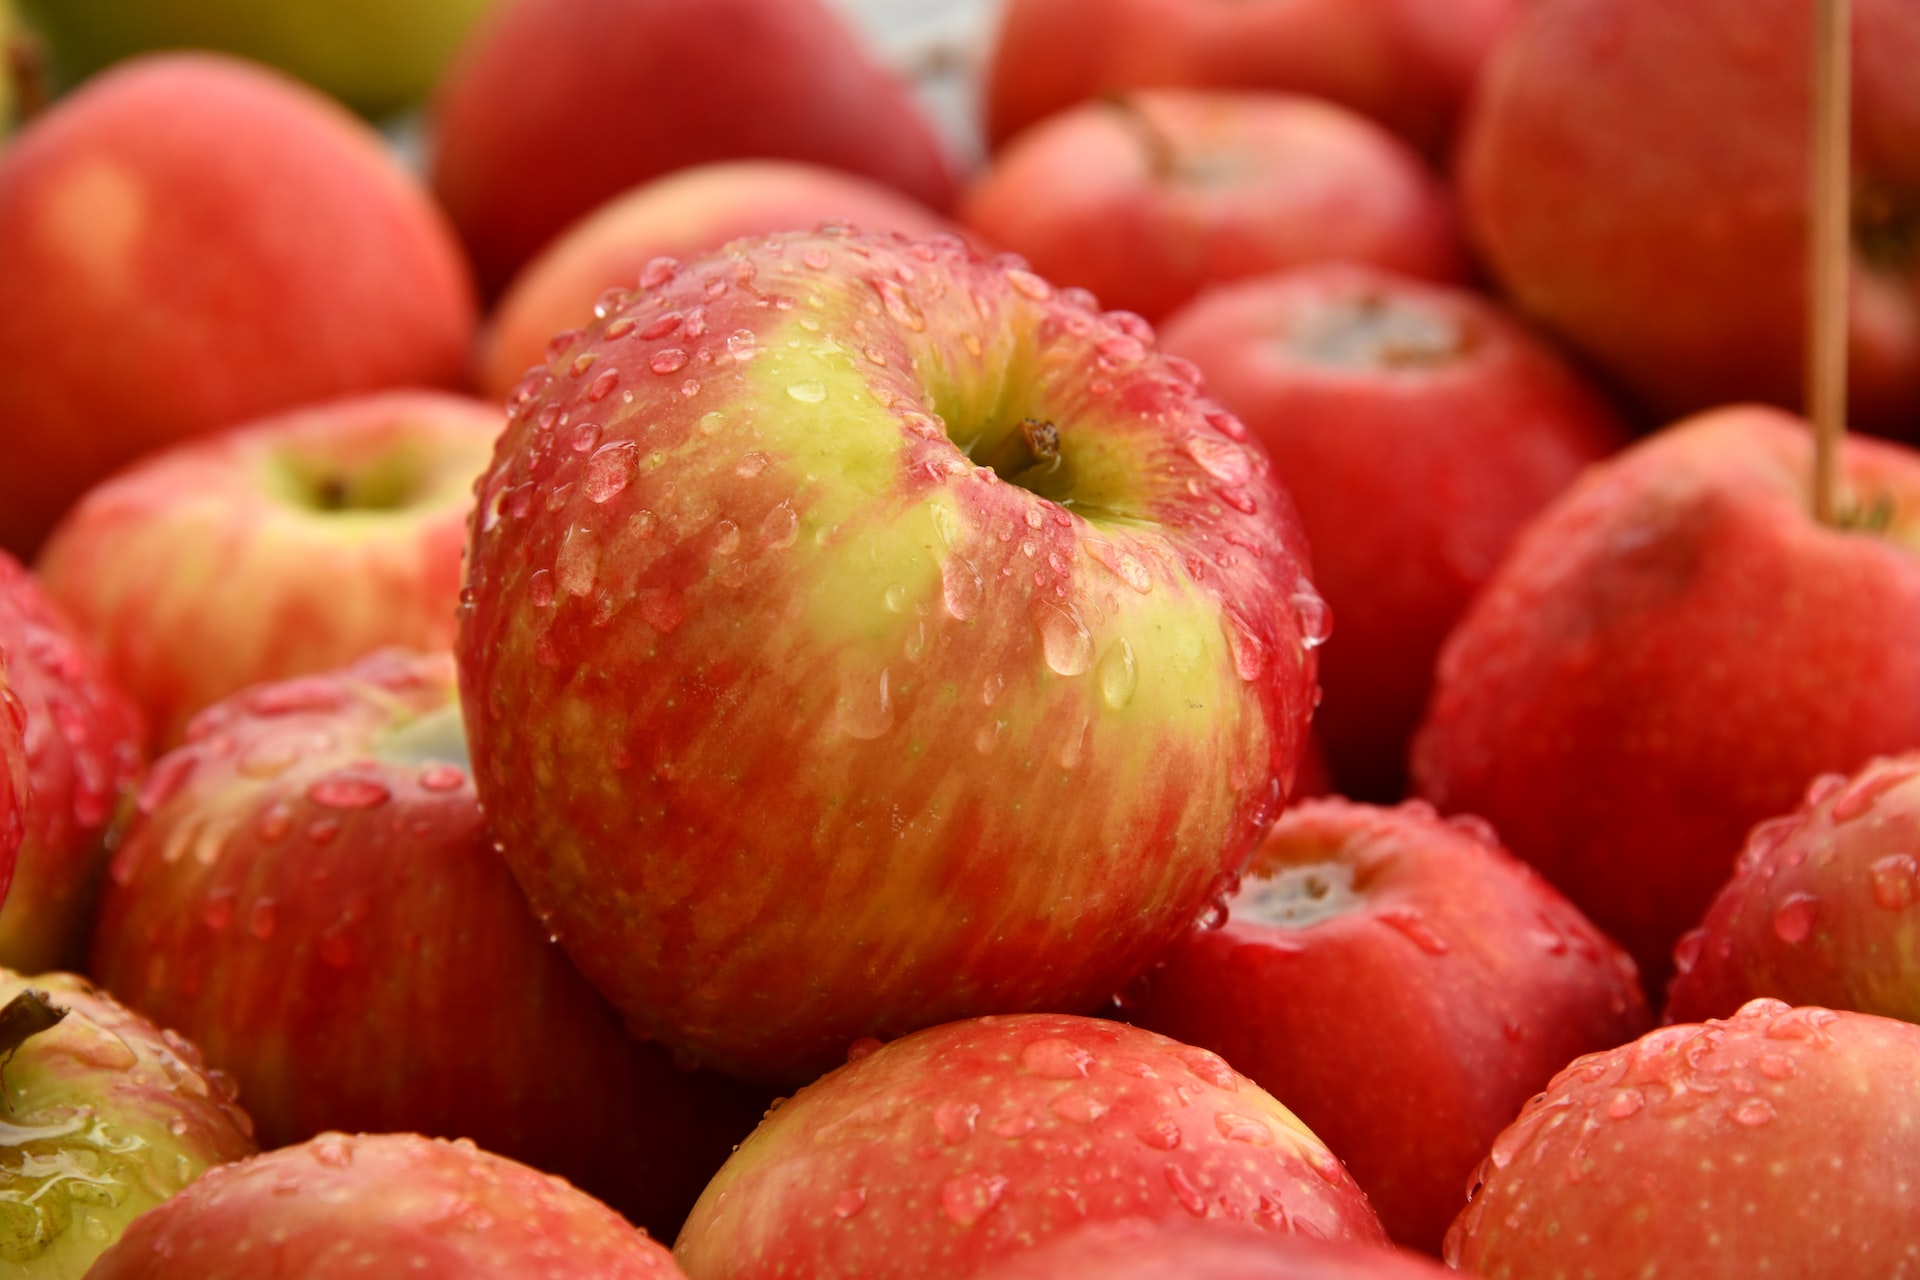 Apples: The Delicious and Nutritious Fruit That’s Good for You